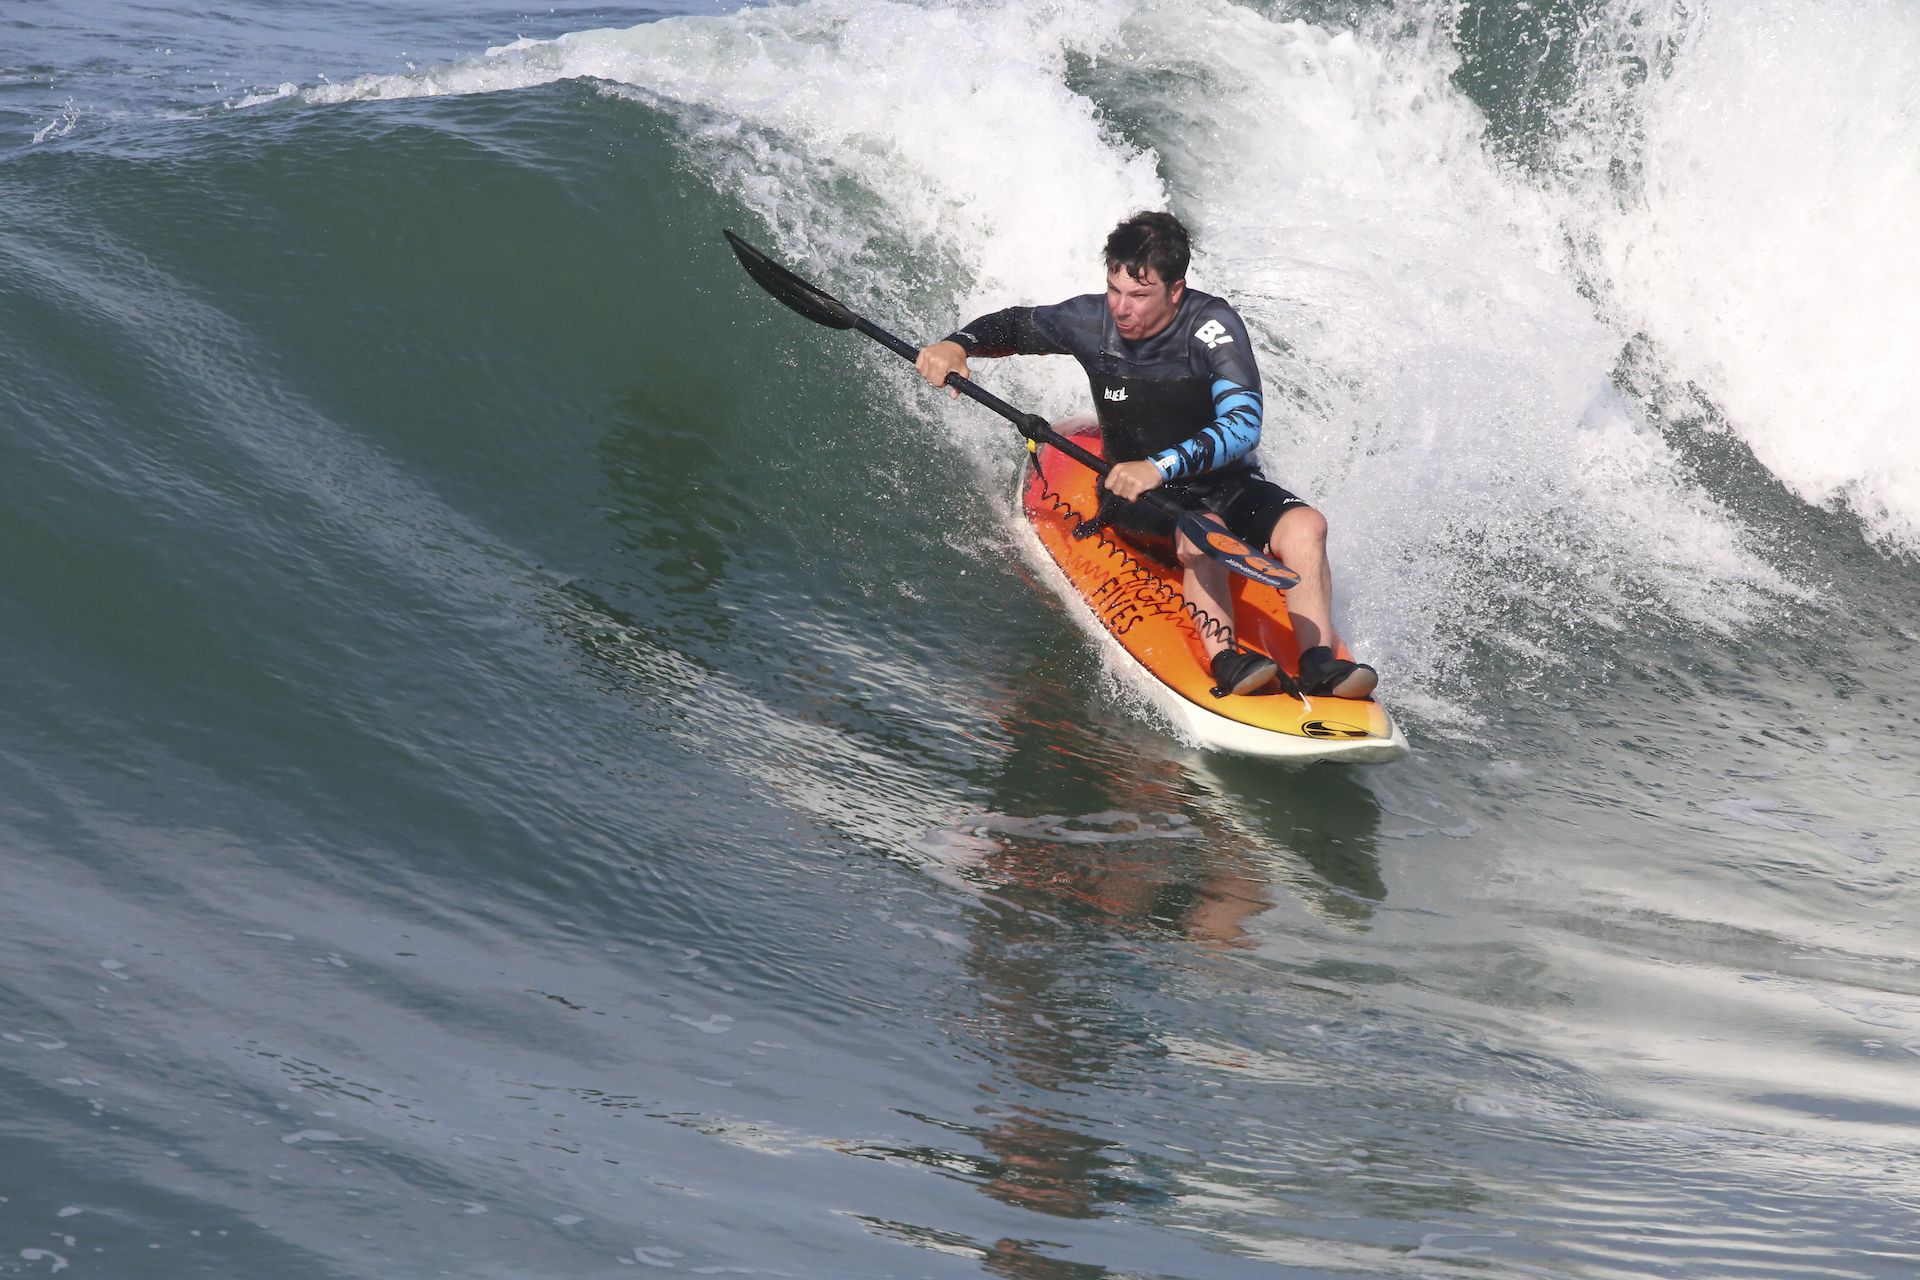 An adaptive surfer rides a wave with a paddle while sitting on a surfboard.